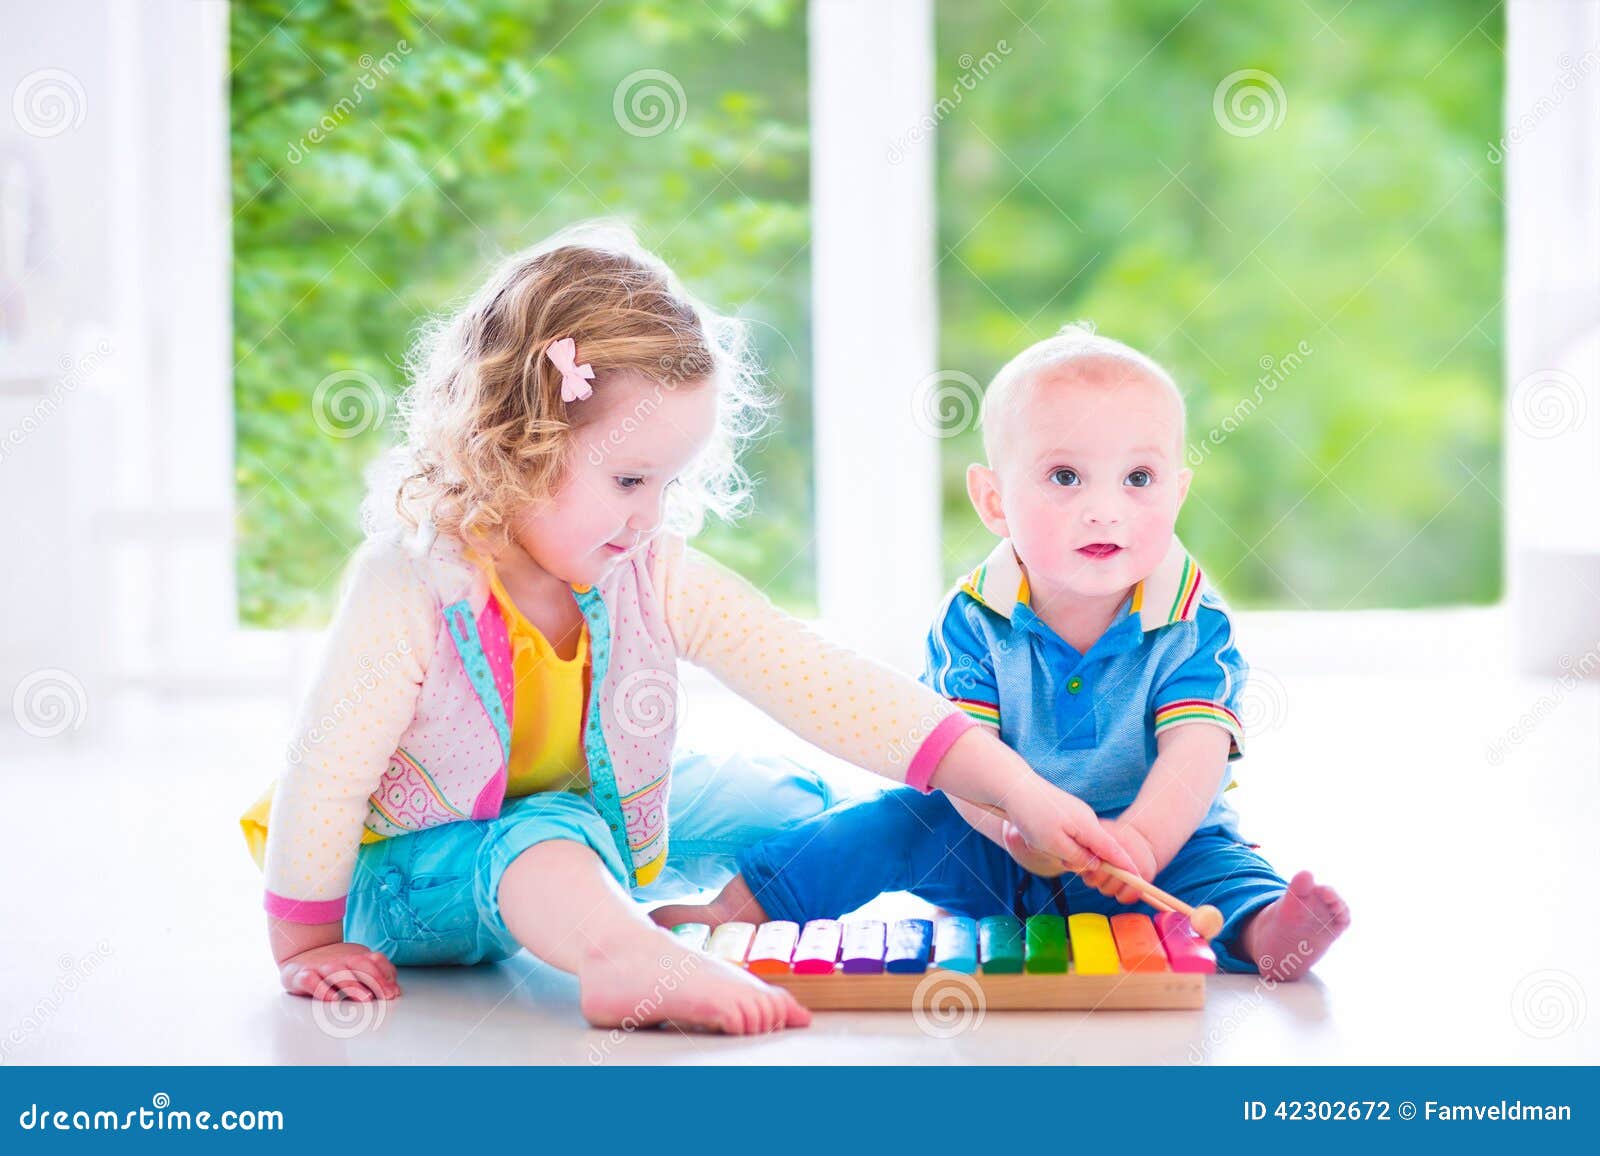 kids playing music with xylophone